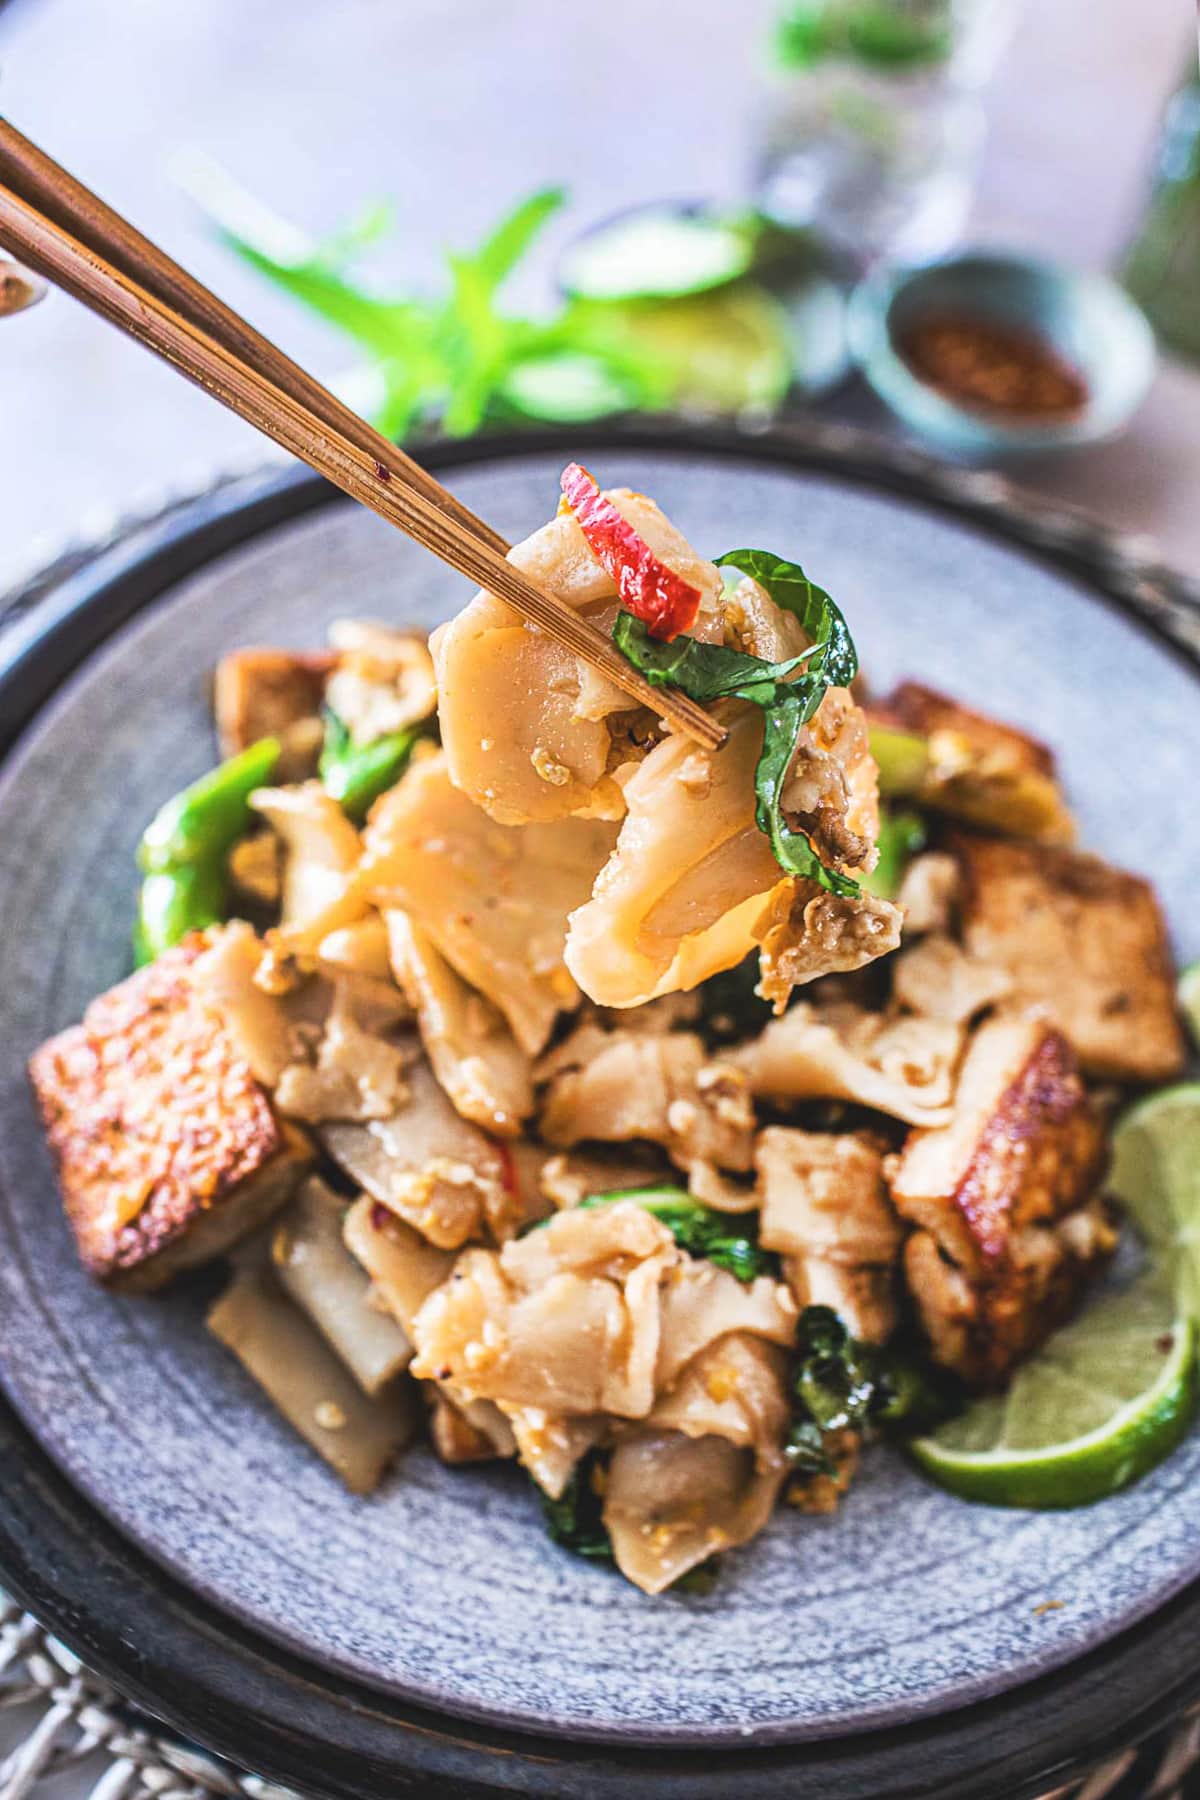 Pad See Ew is a delicious Thai stir-fried noodle dish using wide rice noodles, Chinese broccoli, eggs, your choice of protein ( chicken, tofu, shrimp) and a flavorful sweet soy stir-fry sauce. 